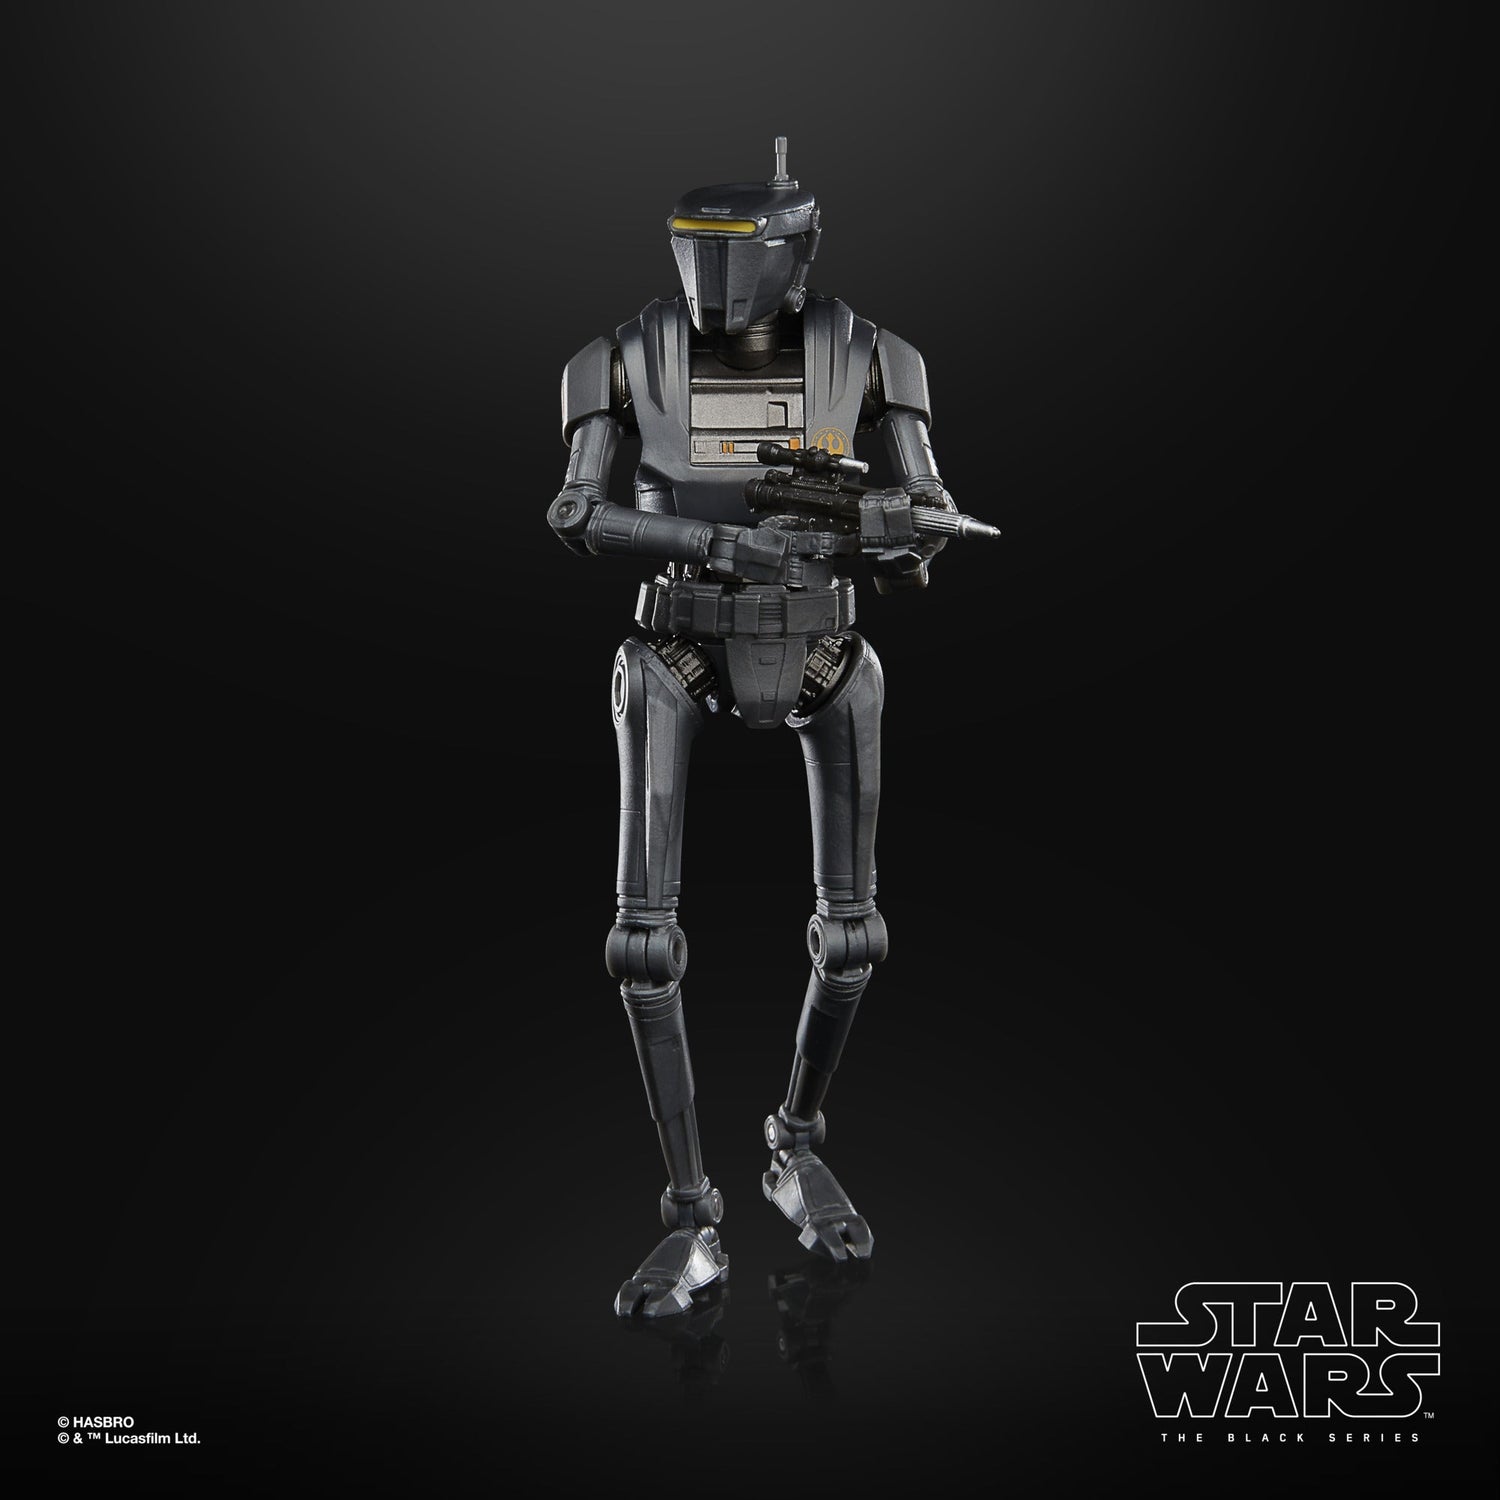 Star Wars: The Black Series New Republic Security Droid Hasbro